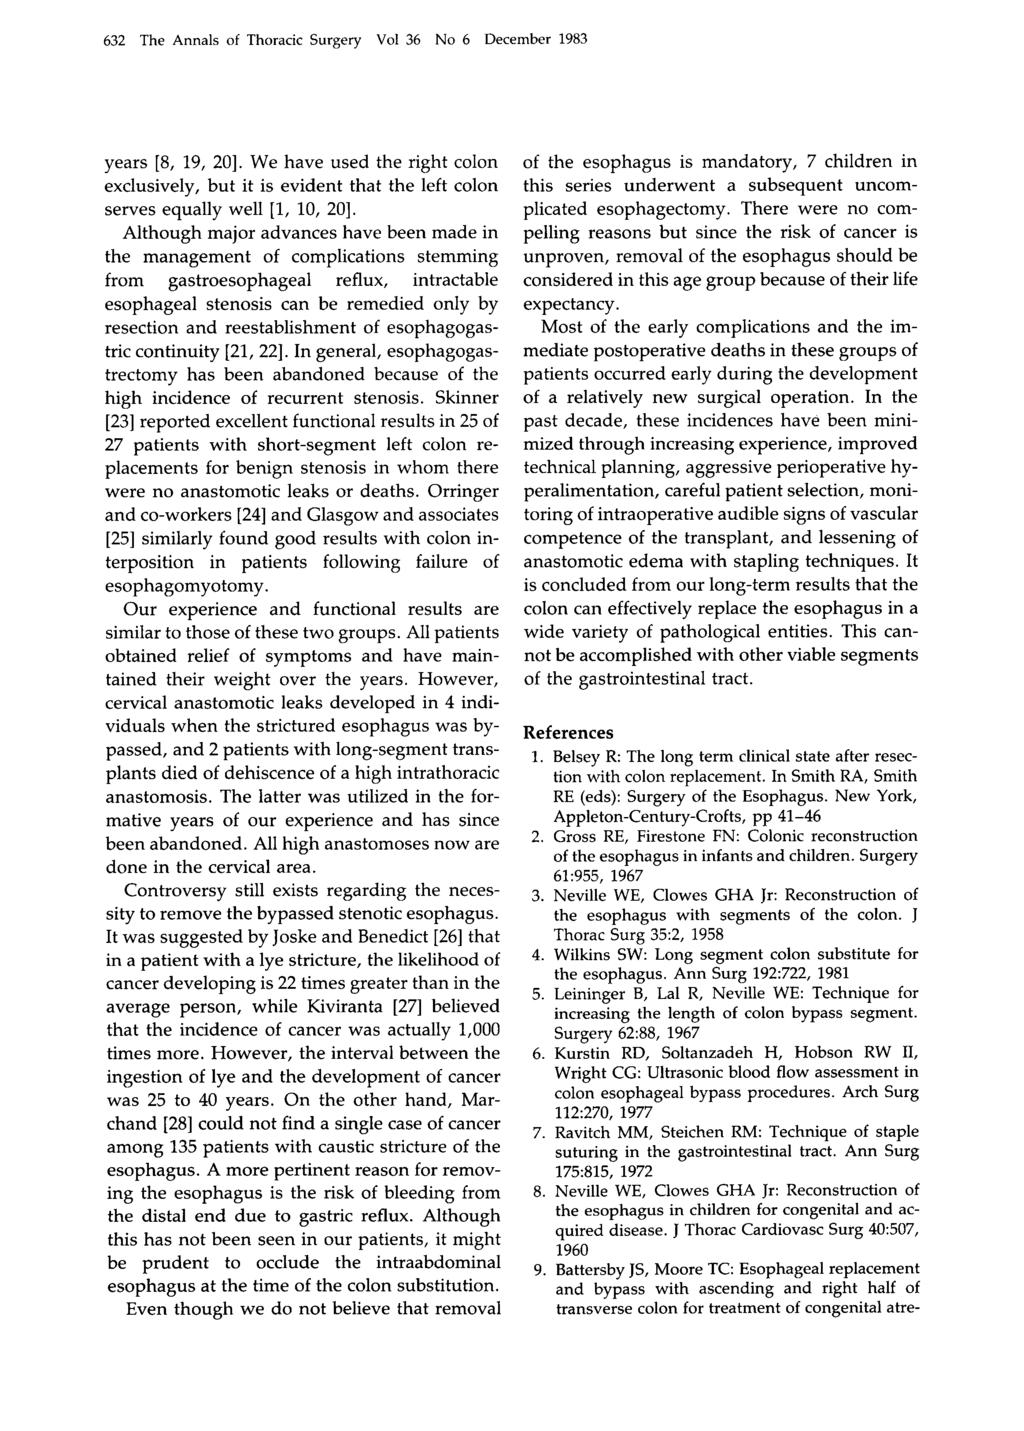 632 The Annals of Thoracic Surgery Vol 36 No 6 December 1983 years [8, 19, 201. We have used the right colon exclusively, but it is evident that the left colon serves equally well [I, 10, 201.